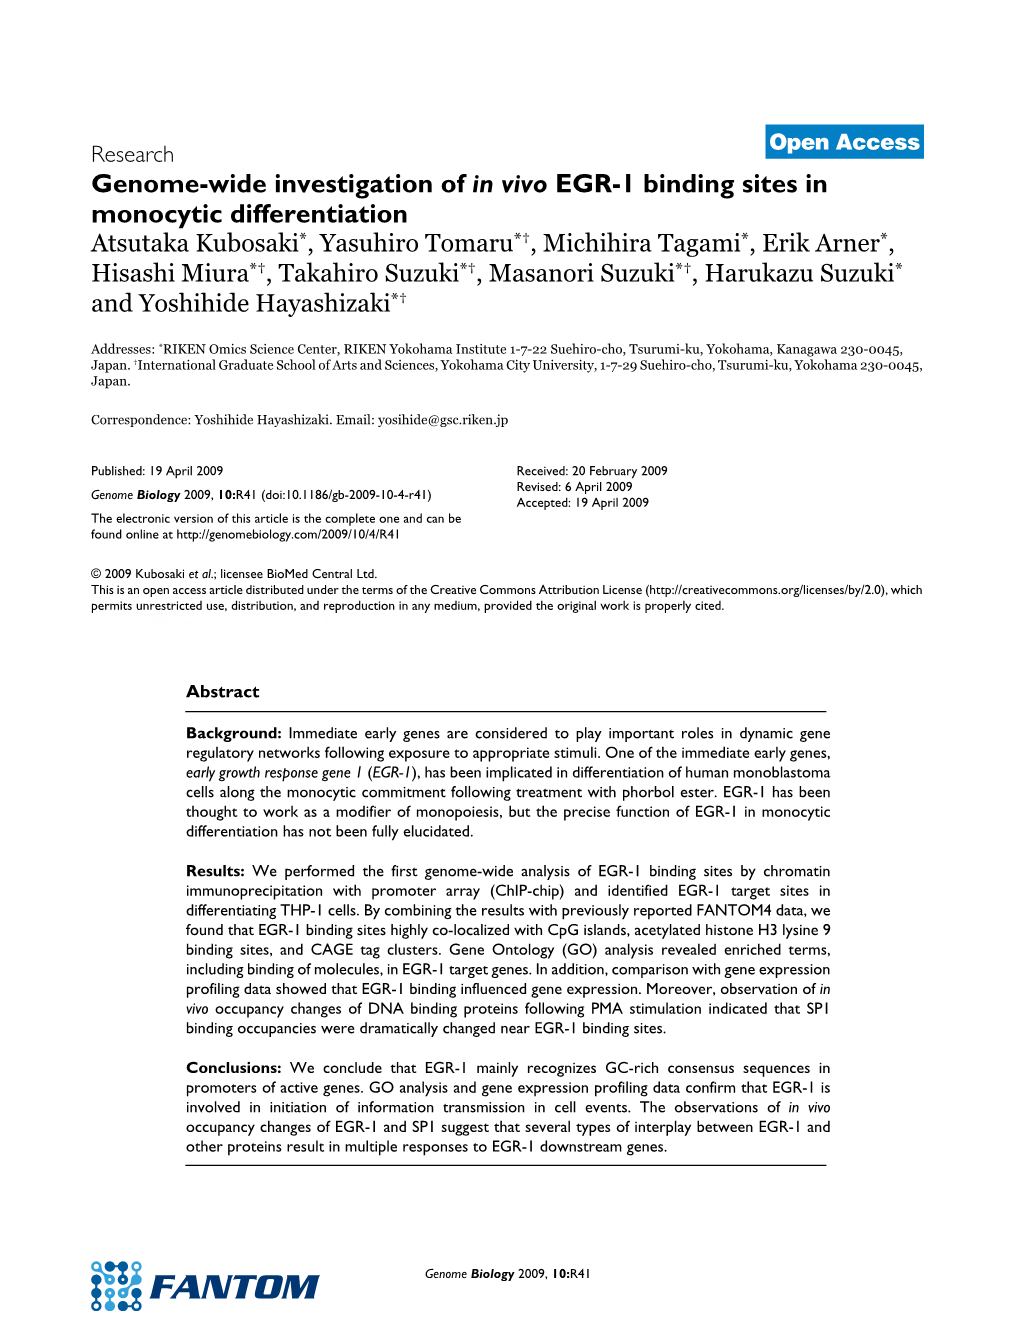 Genome-Wide Investigation of in Vivo EGR-1 Binding Sites in Monocytic